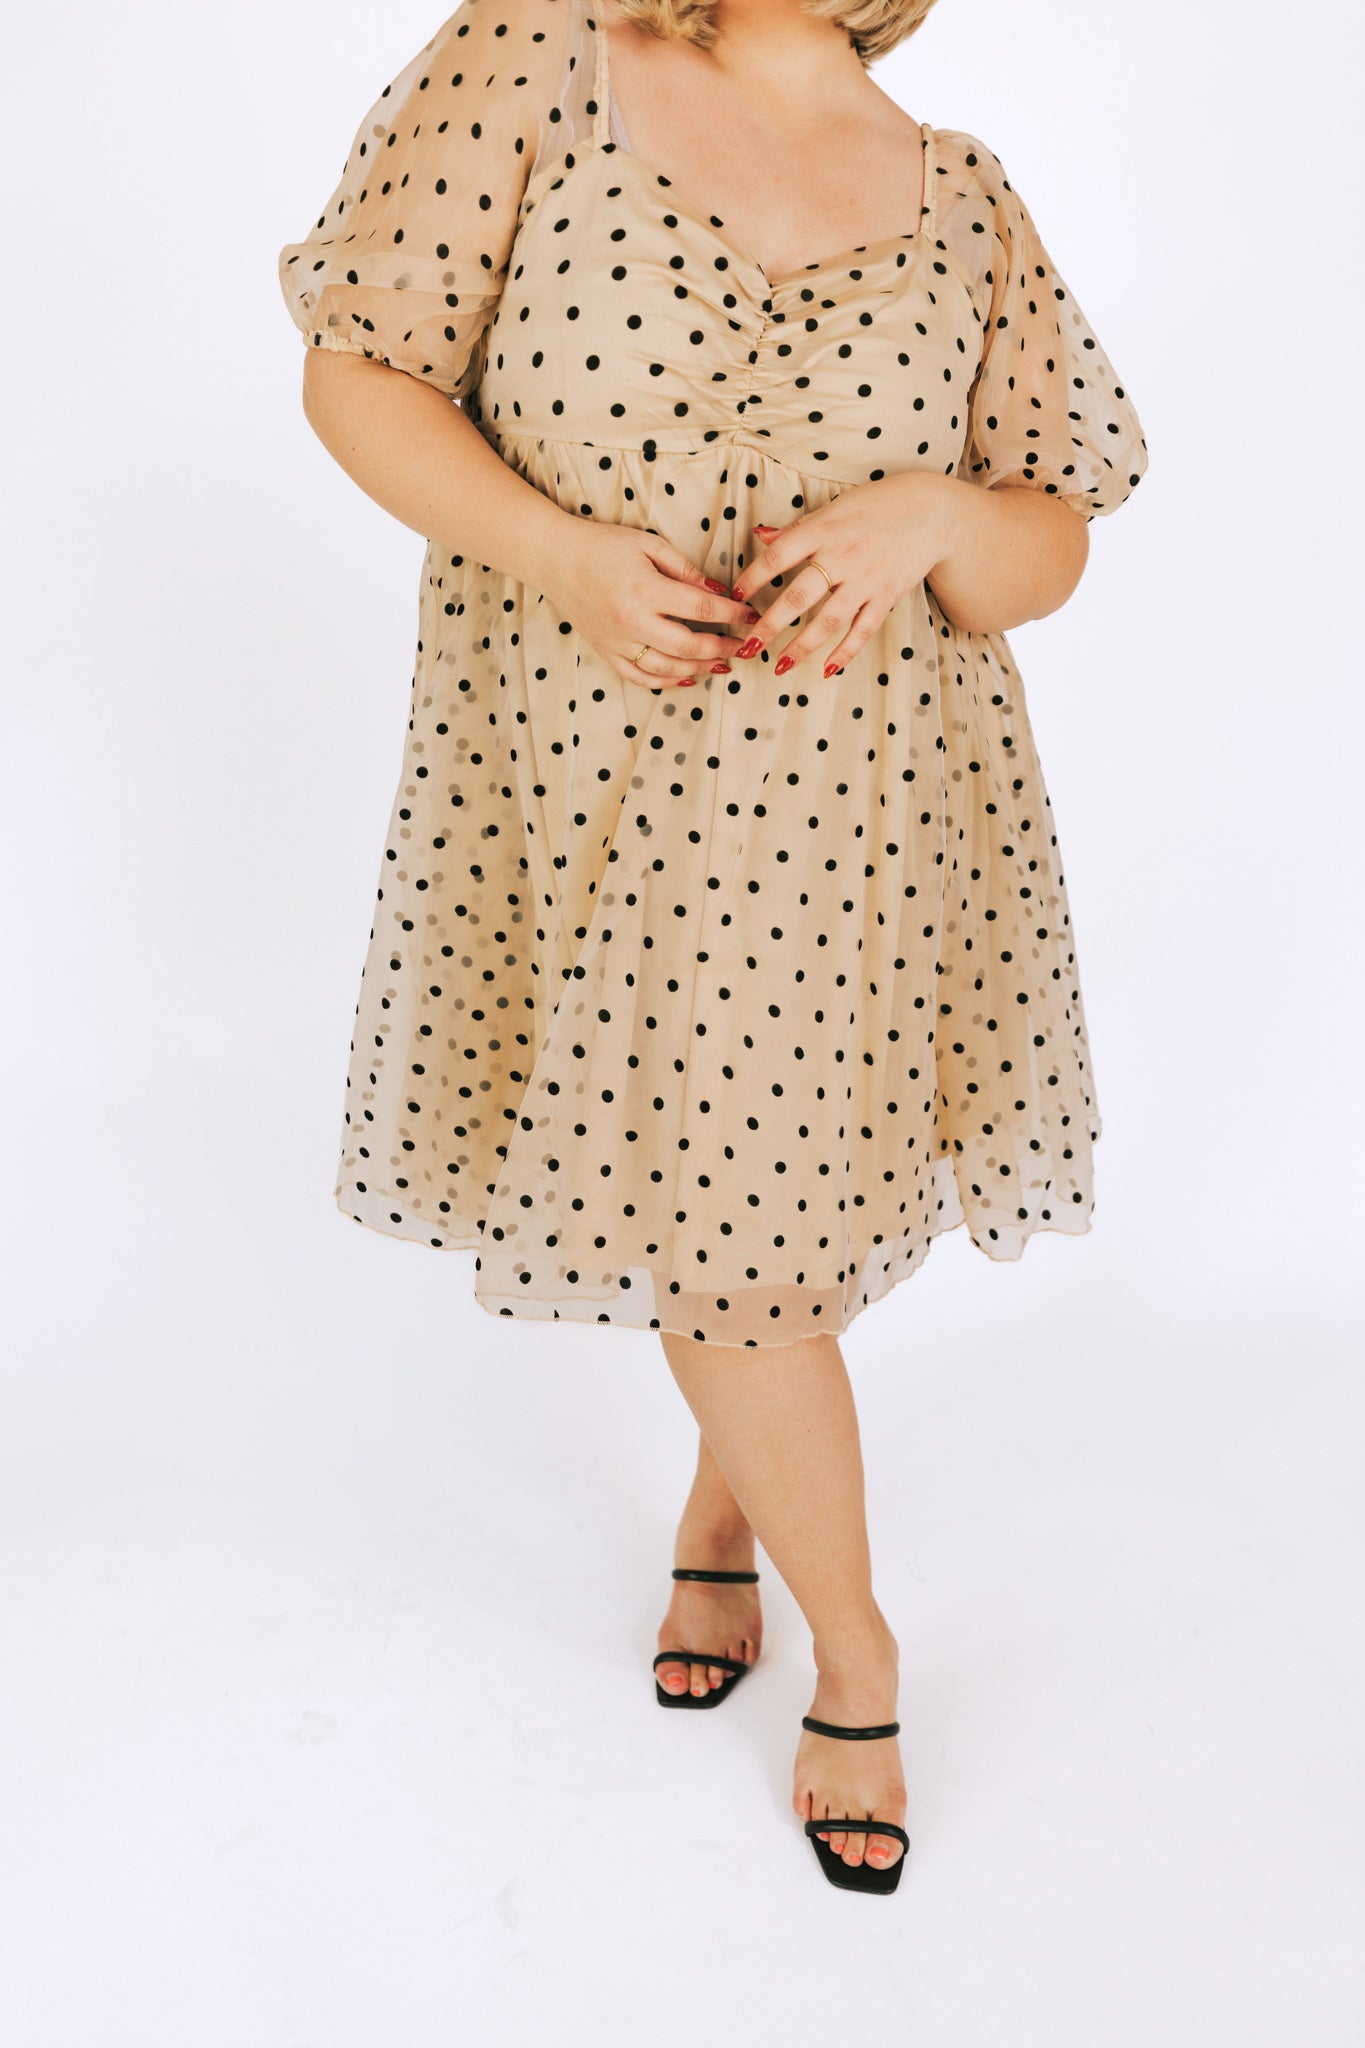 PLUS SIZE - At First Glance Dress